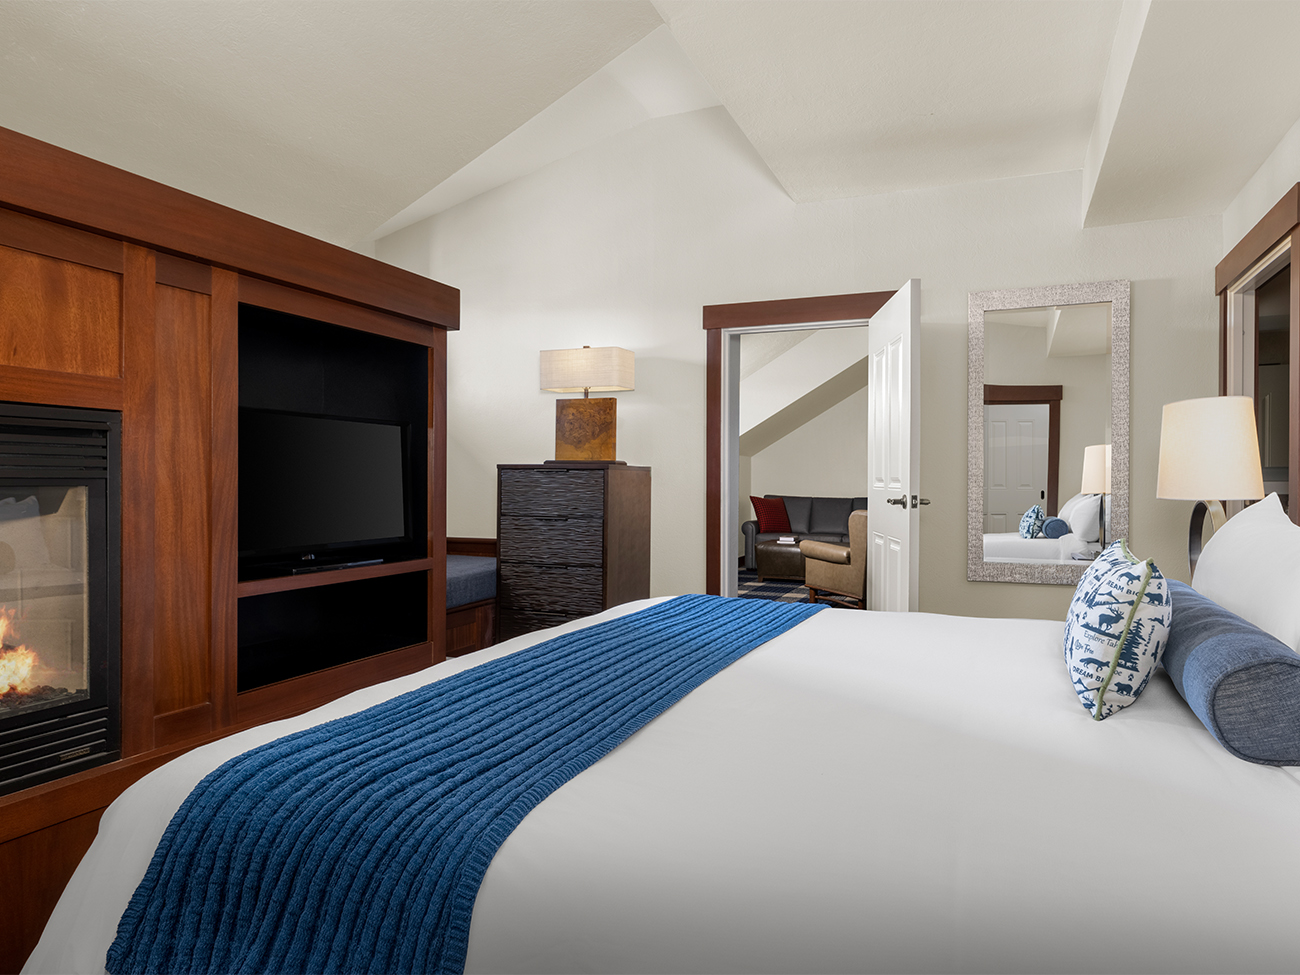 Marriott's Grand Residence Club<span class='trademark'>®</span> 1, Lake Tahoe Penthouse Guest Bedroom. Marriott's Grand Residence Club<span class='trademark'>®</span> 1, Lake Tahoe is located in South Lake Tahoe, California United States.